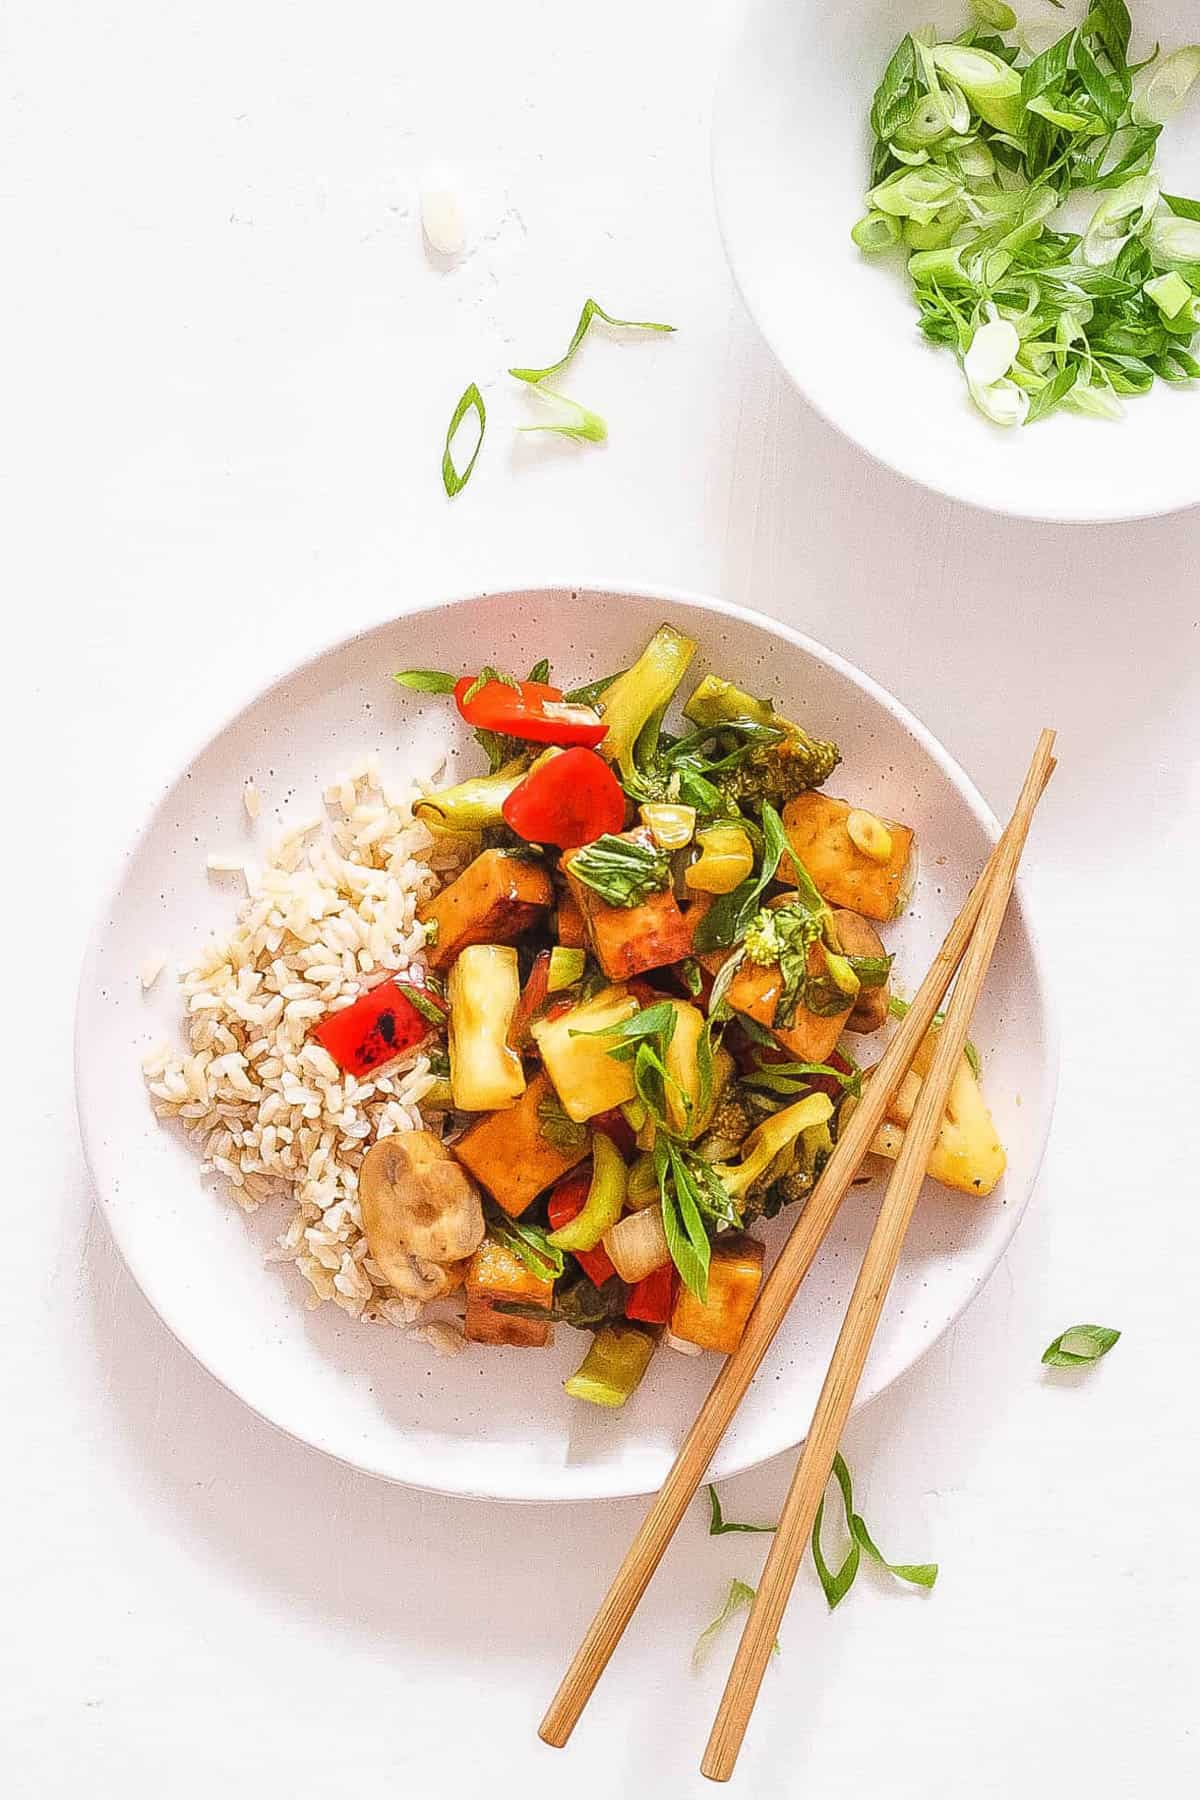 Vegan sweet and sour tofu, served on a white plate with c،psticks.